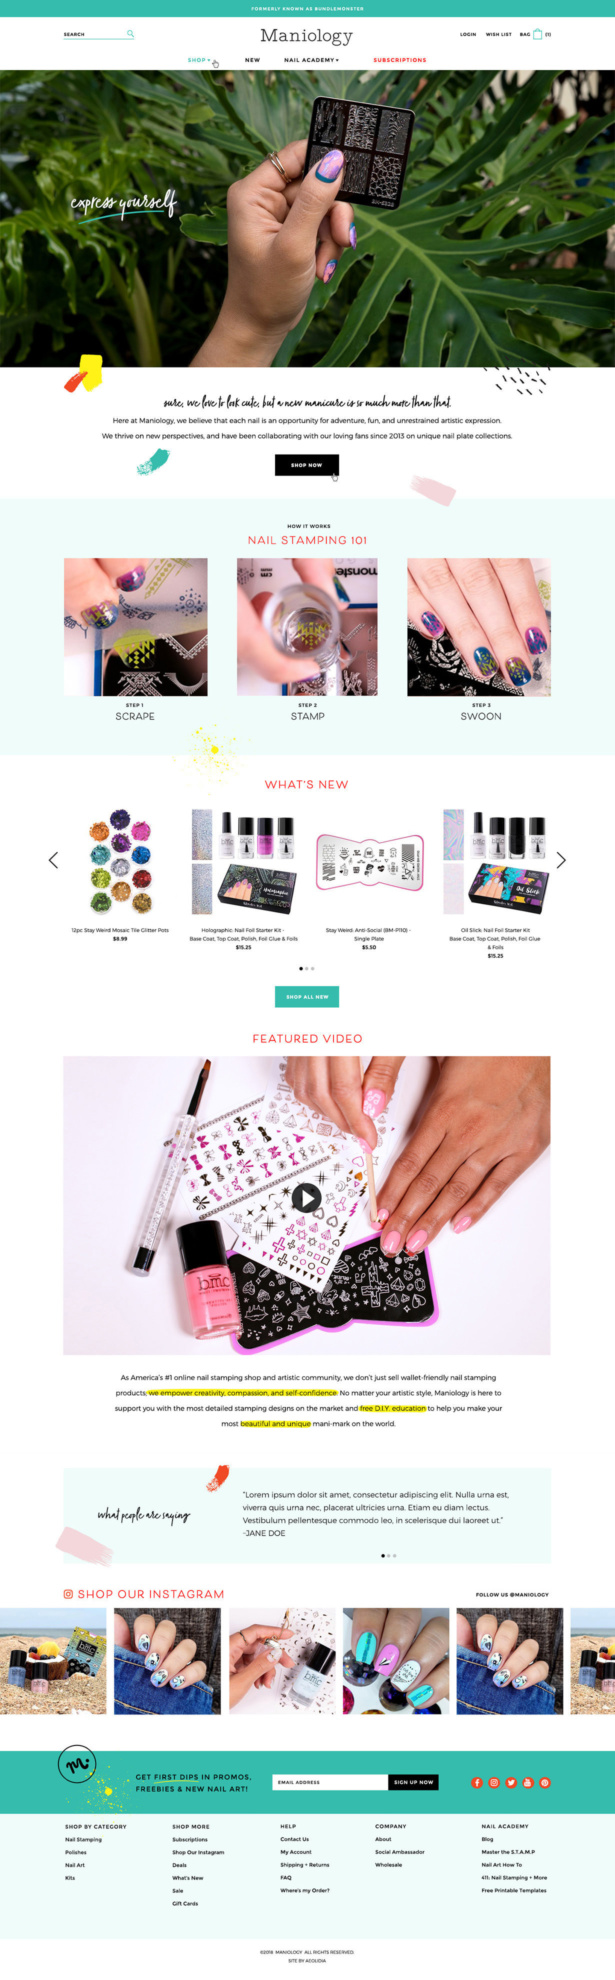 Maniology custom Shopify website for online nail stamping shop